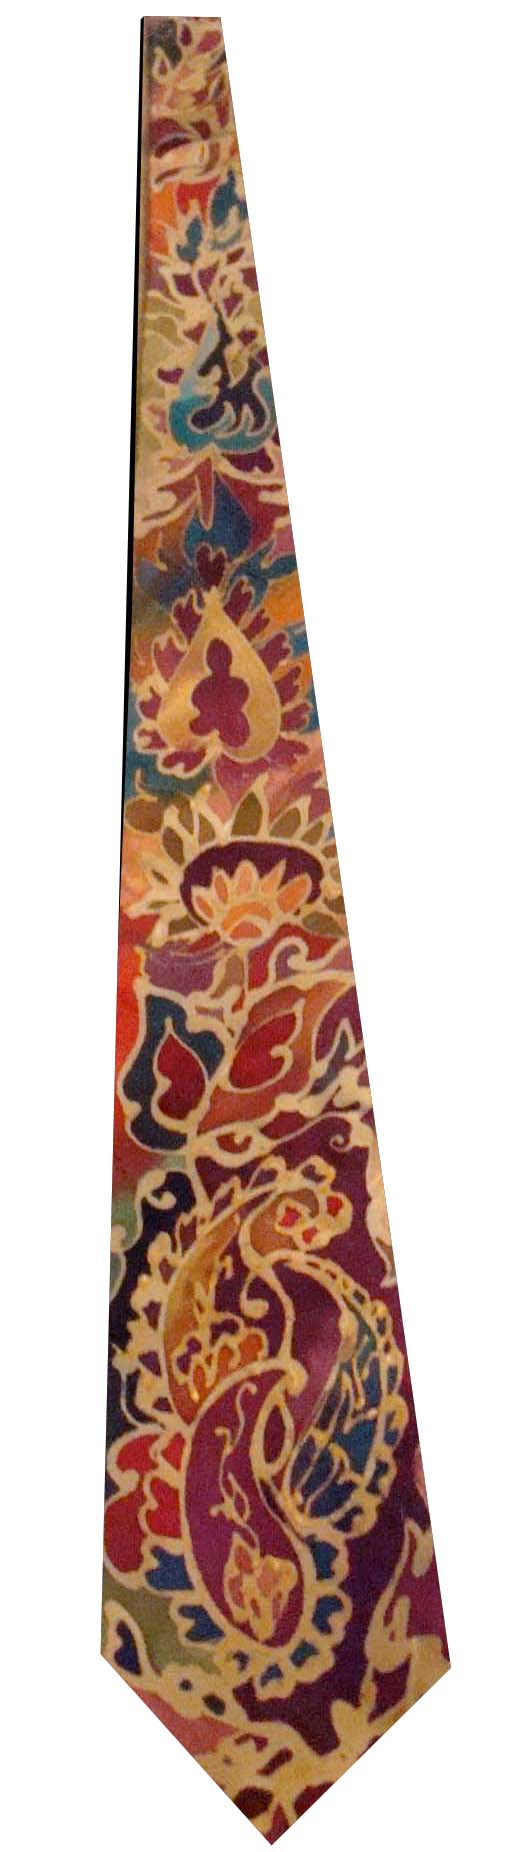 Intricate patterns from Kolkata alpona style is painted on this silk charmeuse ties. Dry clean only. The dyes are permanent after steam setting.